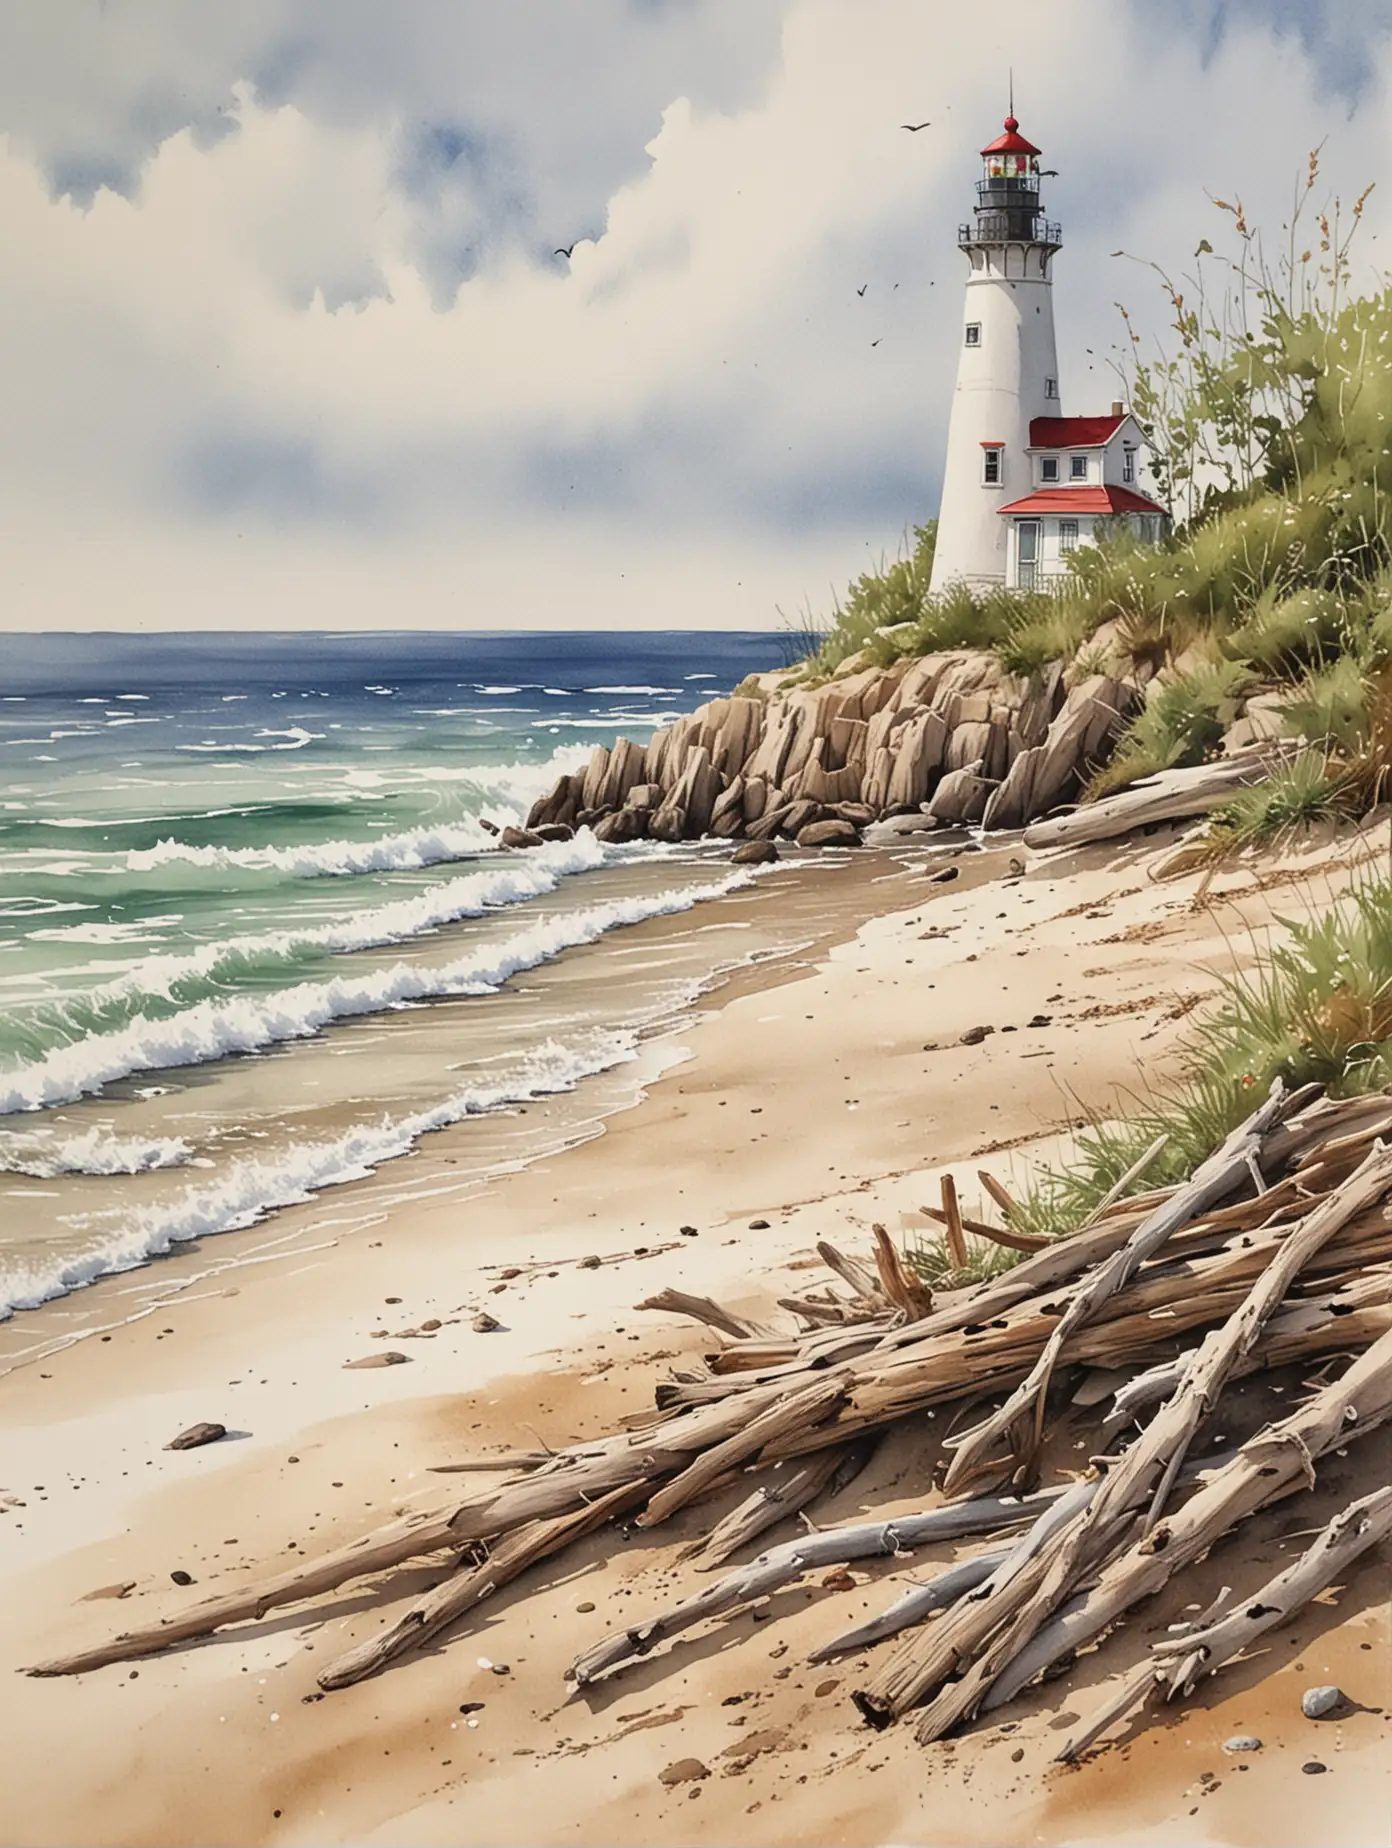 create a watercolor painting of a beach scene with small pieces of driftwood, a light house and other Cape Code shoreline elements

